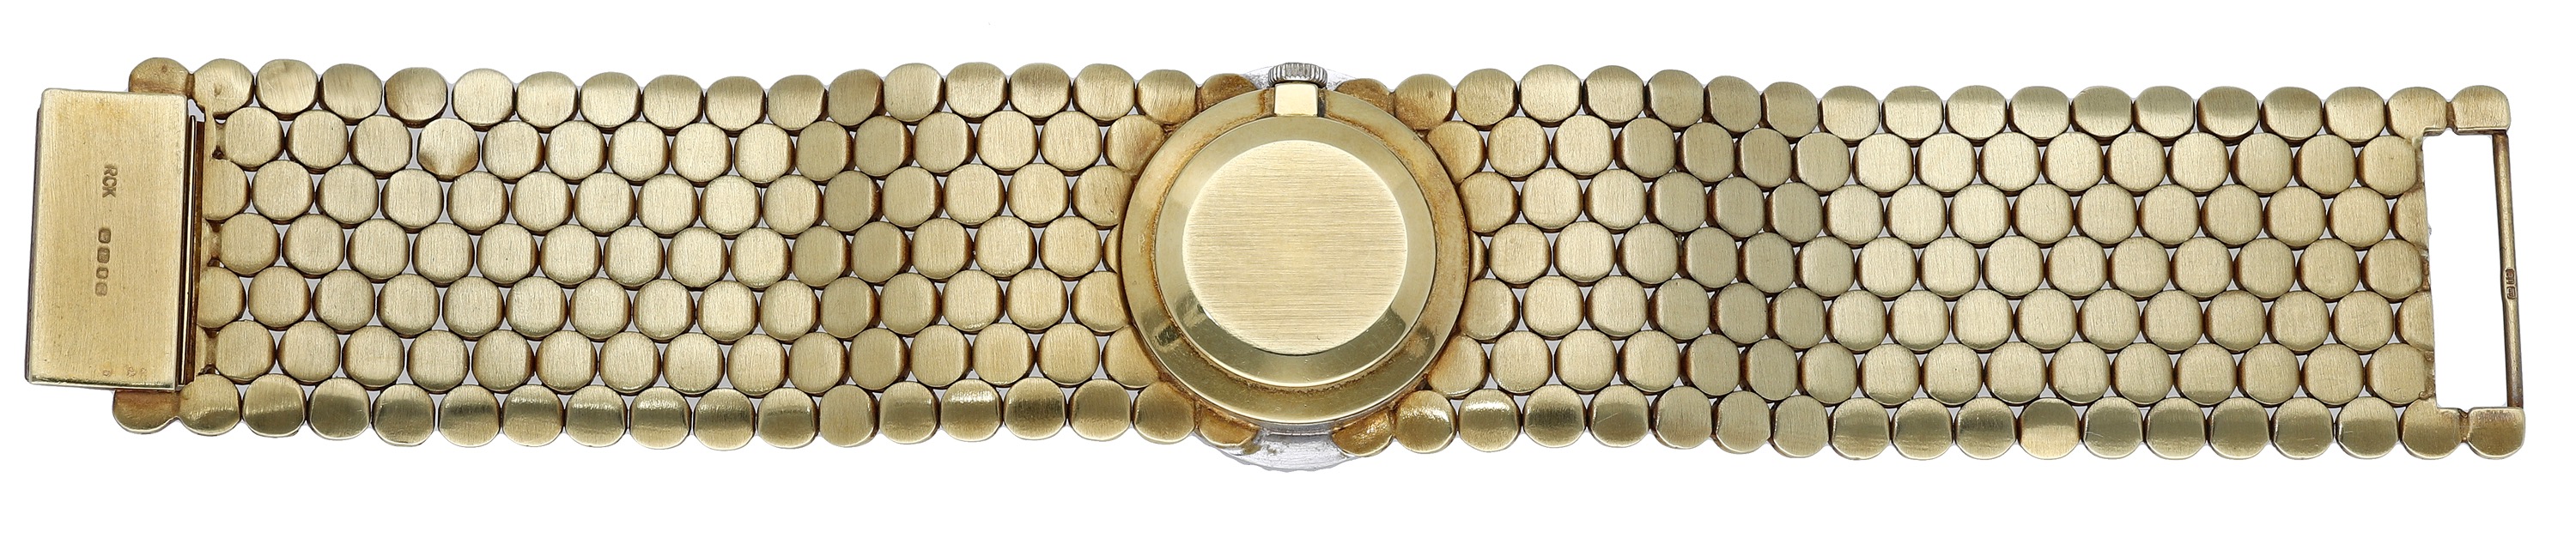 Bueche Girod. A gold and diamond-set bracelet watch with tiger's eye dial, circa 1971. Move... - Image 4 of 6